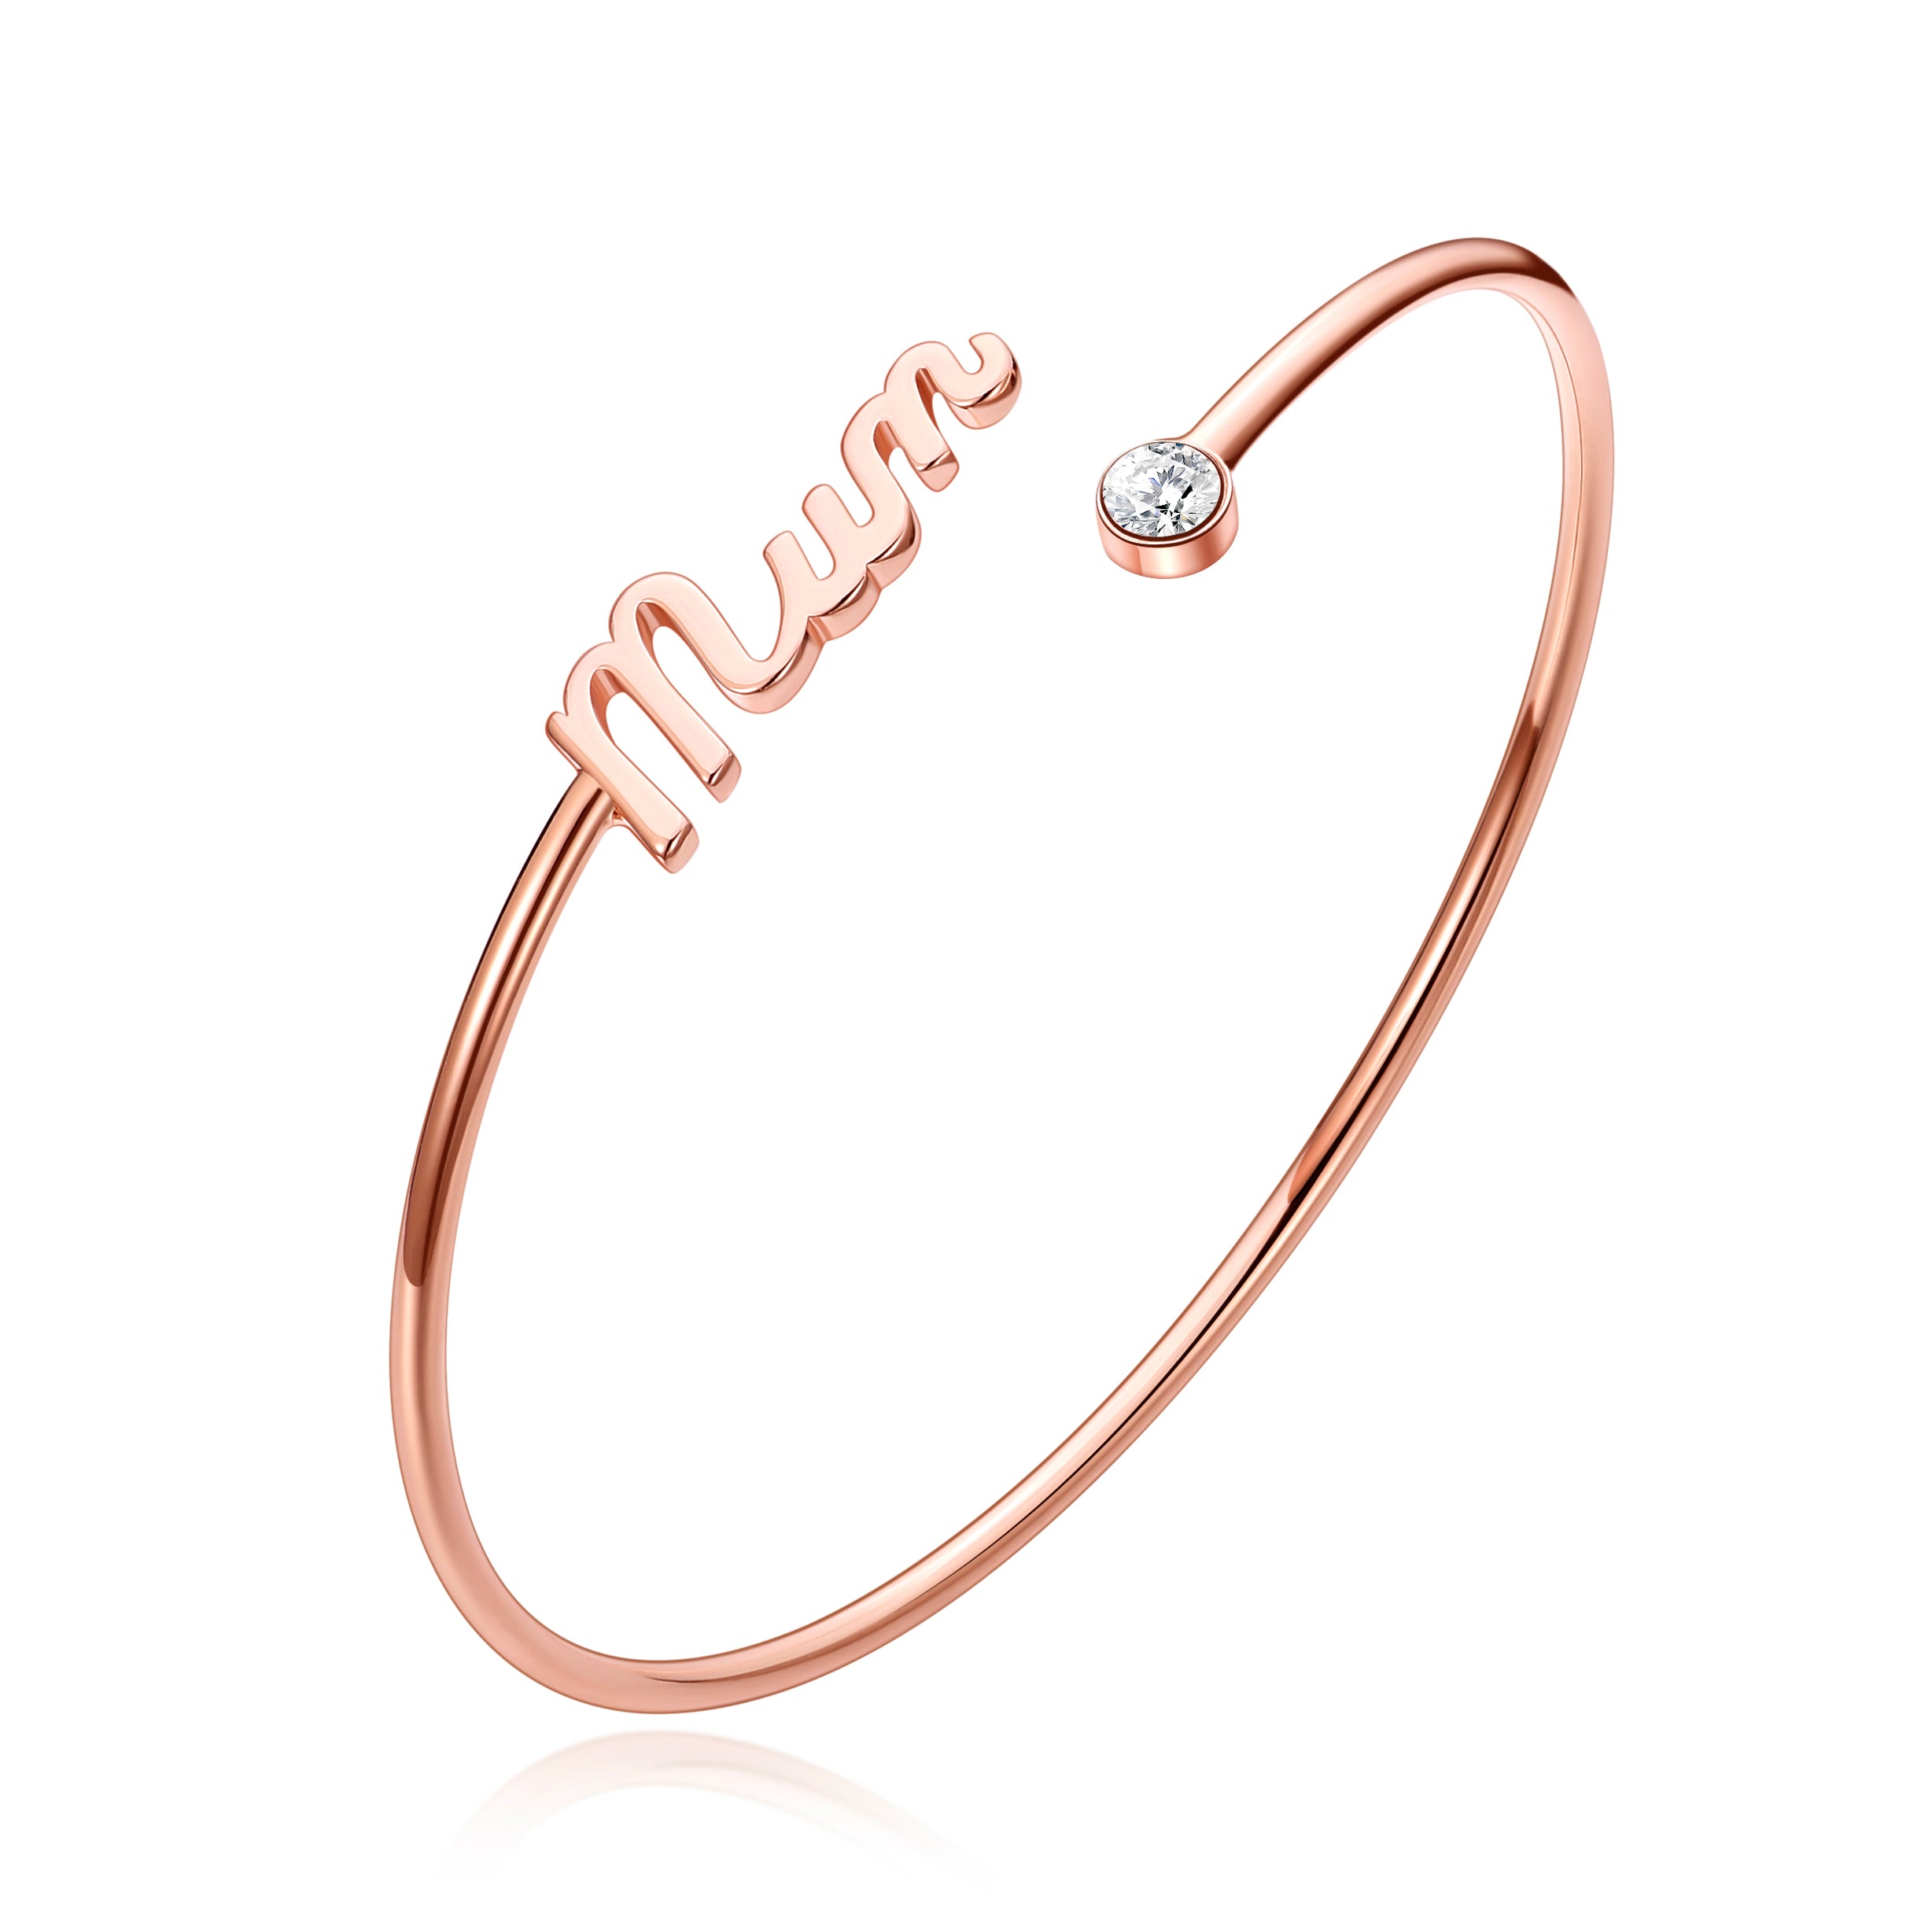 Rose Gold Plated Mum Cuff Bangle Created with Zircondia® Crystals by Philip Jones Jewellery